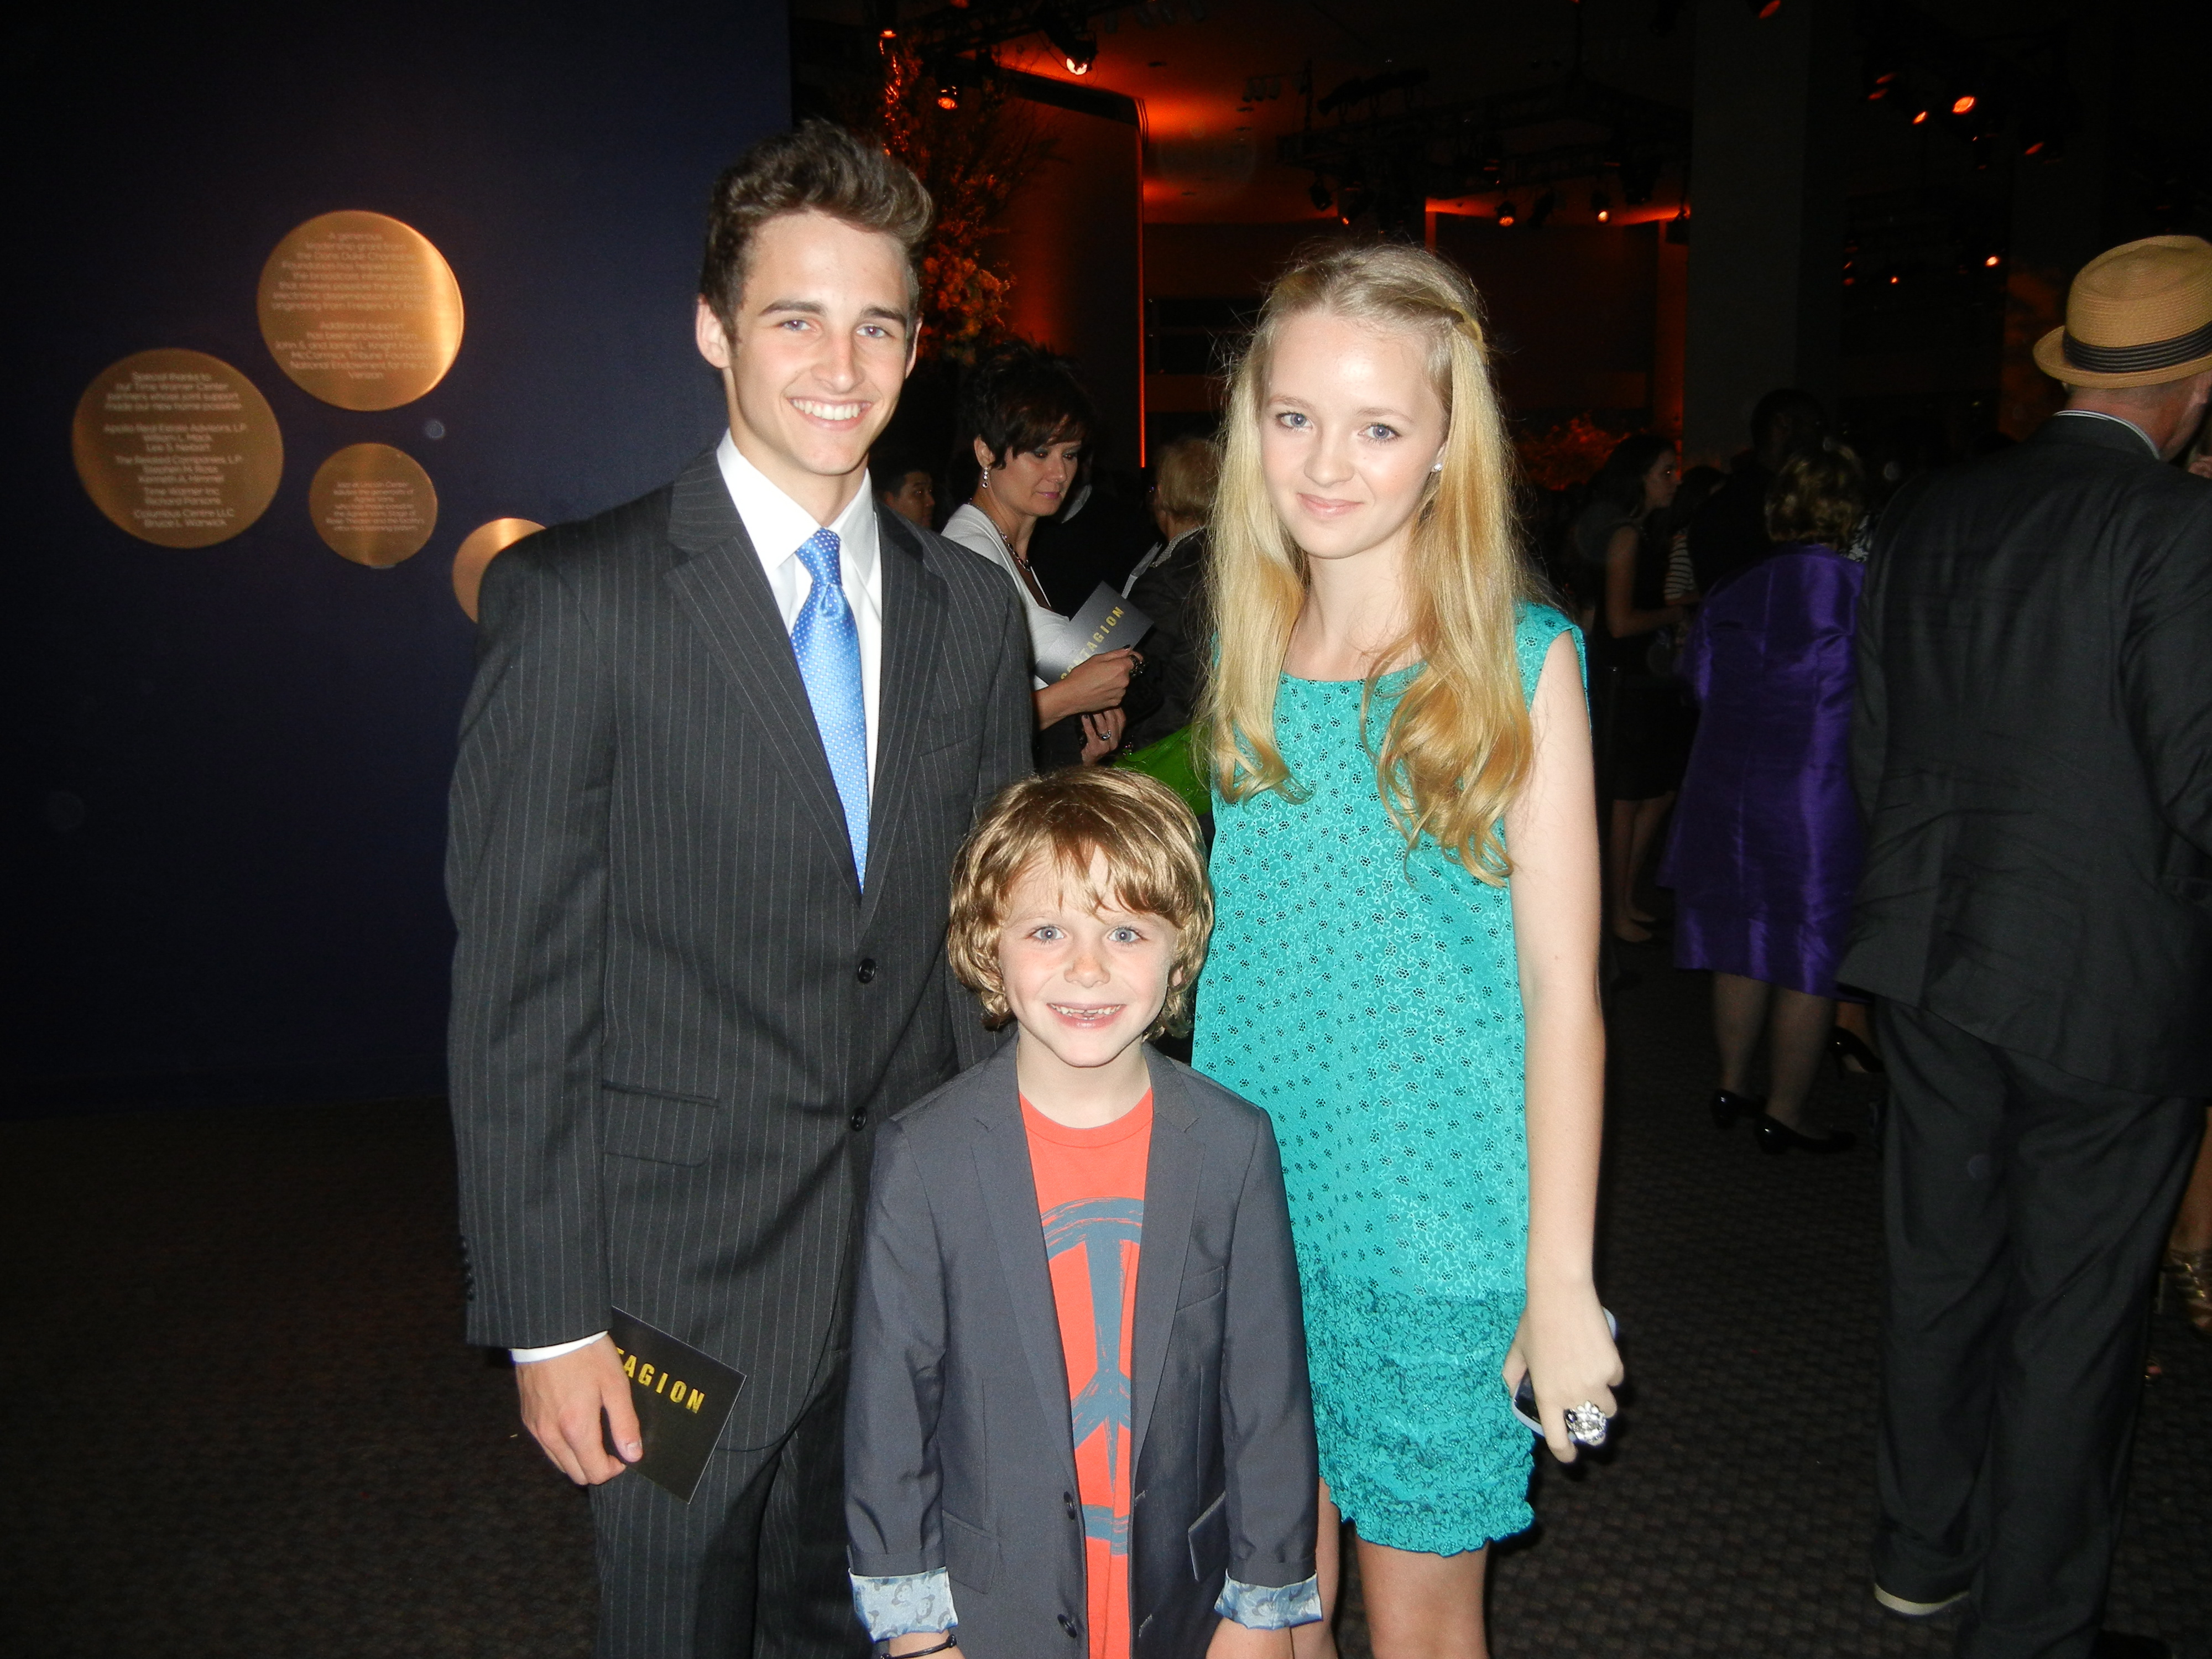 Griffin Kane with Brian J. O'Donnell and Anna Jacoby-Heron at the Contagion premiere, NYC 2011.